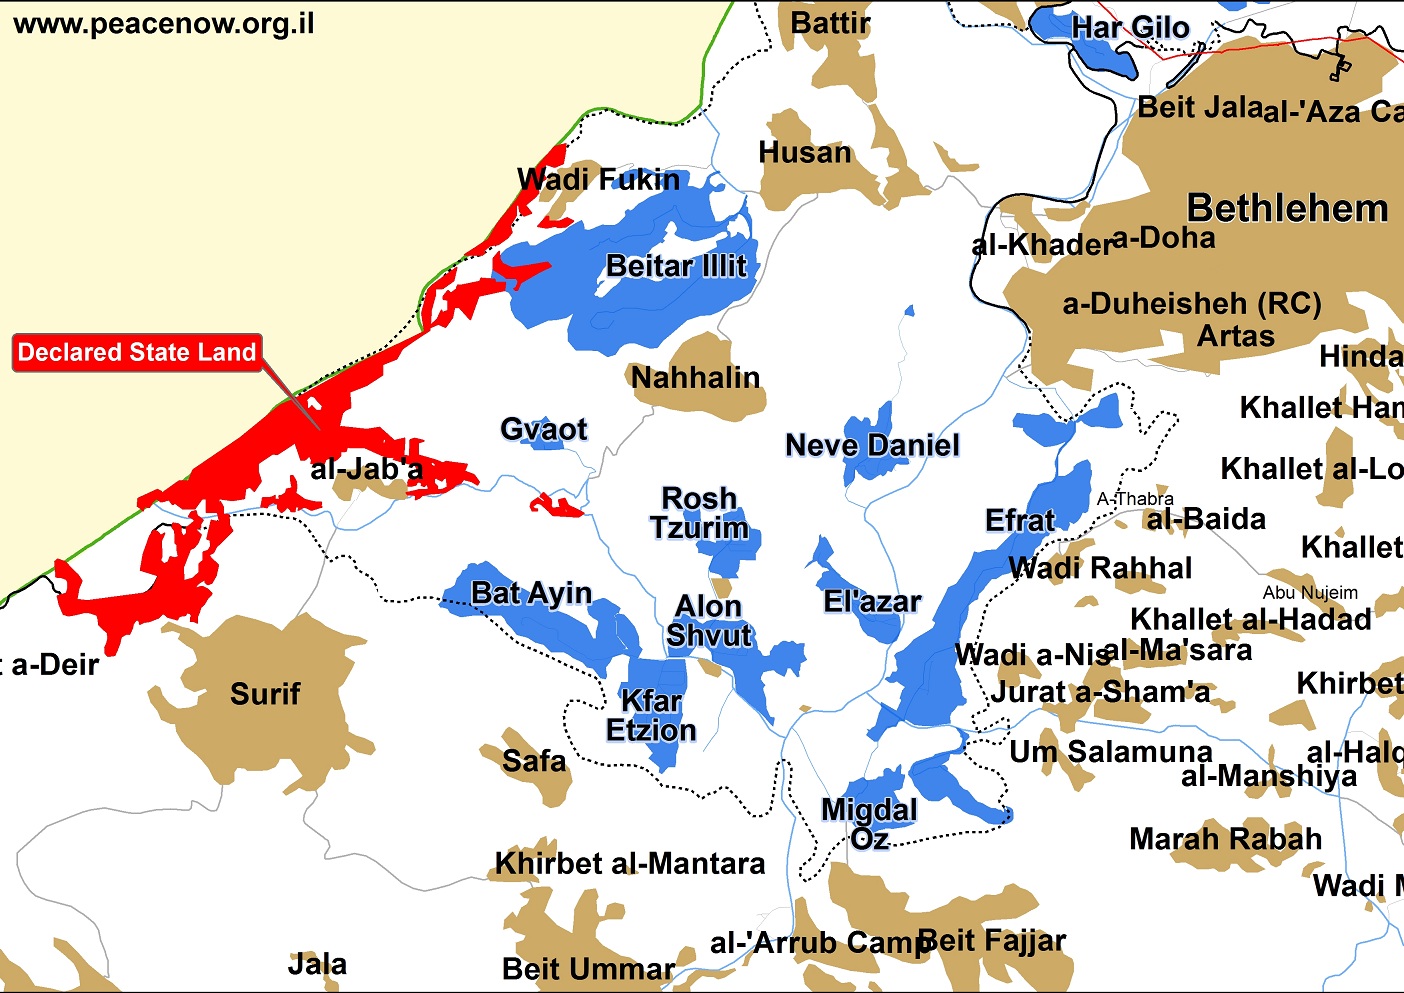 Map of West Bank area West of Bethlemen showing Israeli settlements (blue), Palestinian villages and towns (brown) and the area declared as State Land (red). (Peace Now)